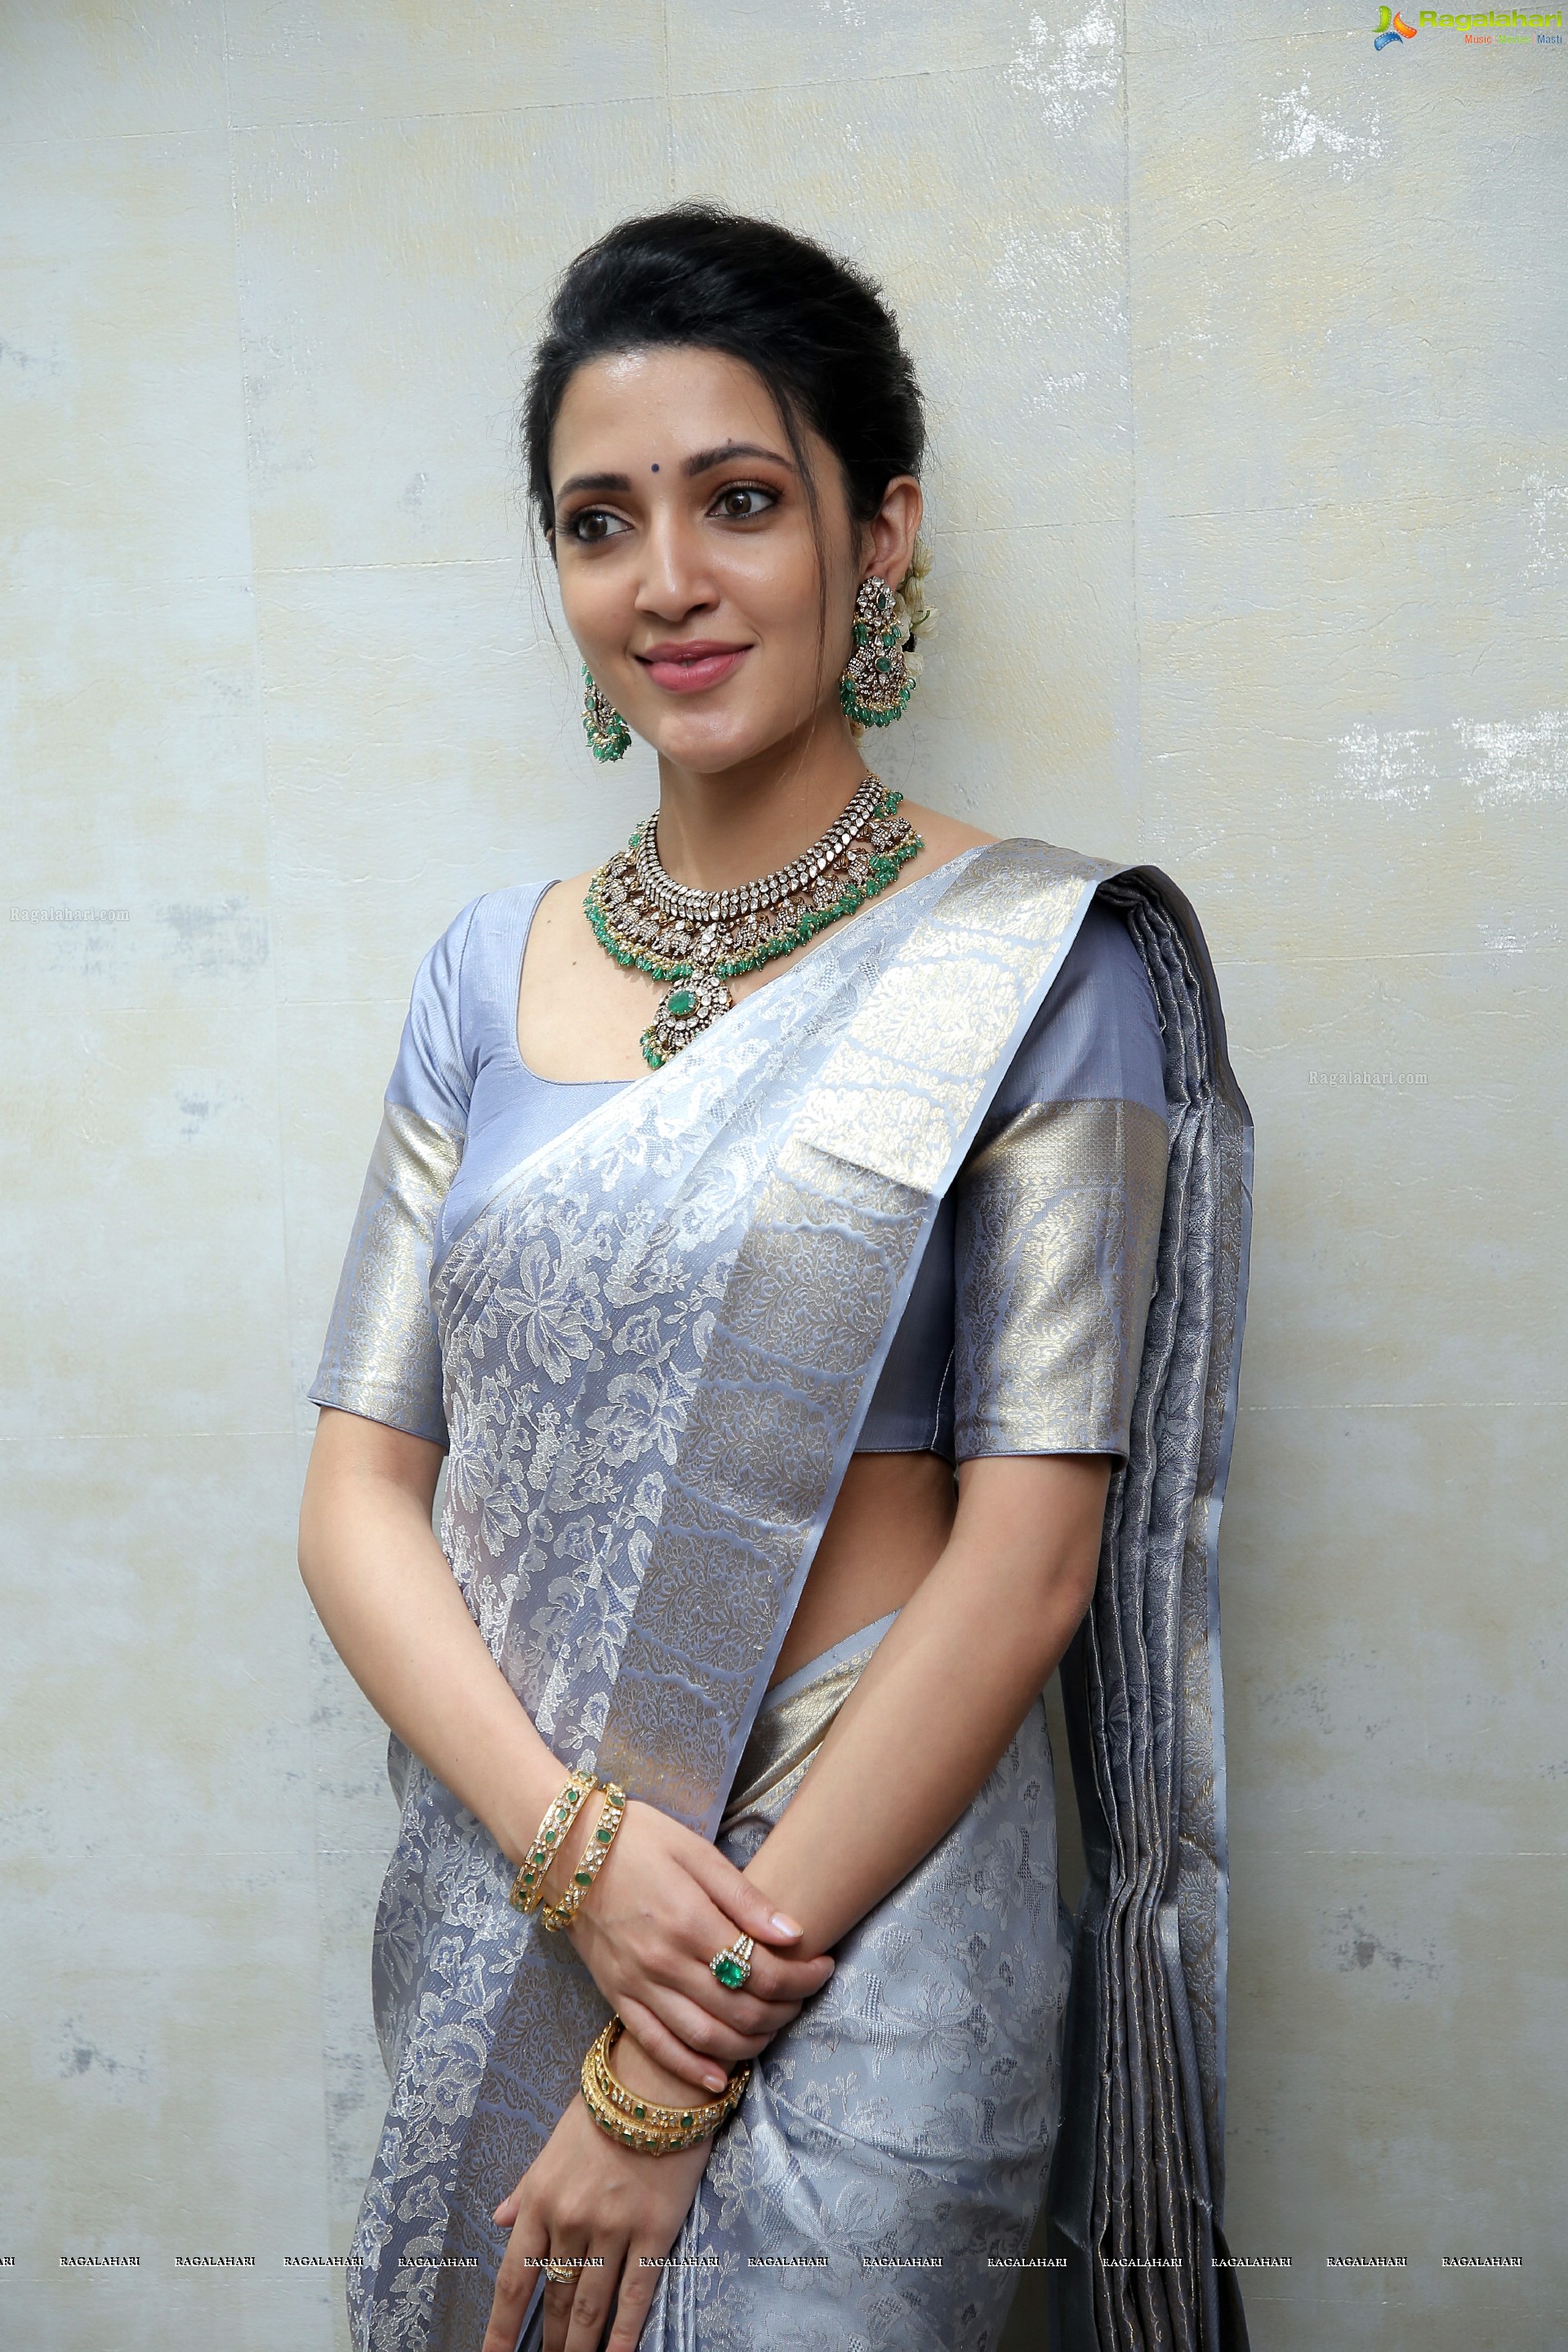 Neha Shetty Poses With Traditional Jewellery, HD Photo Gallery